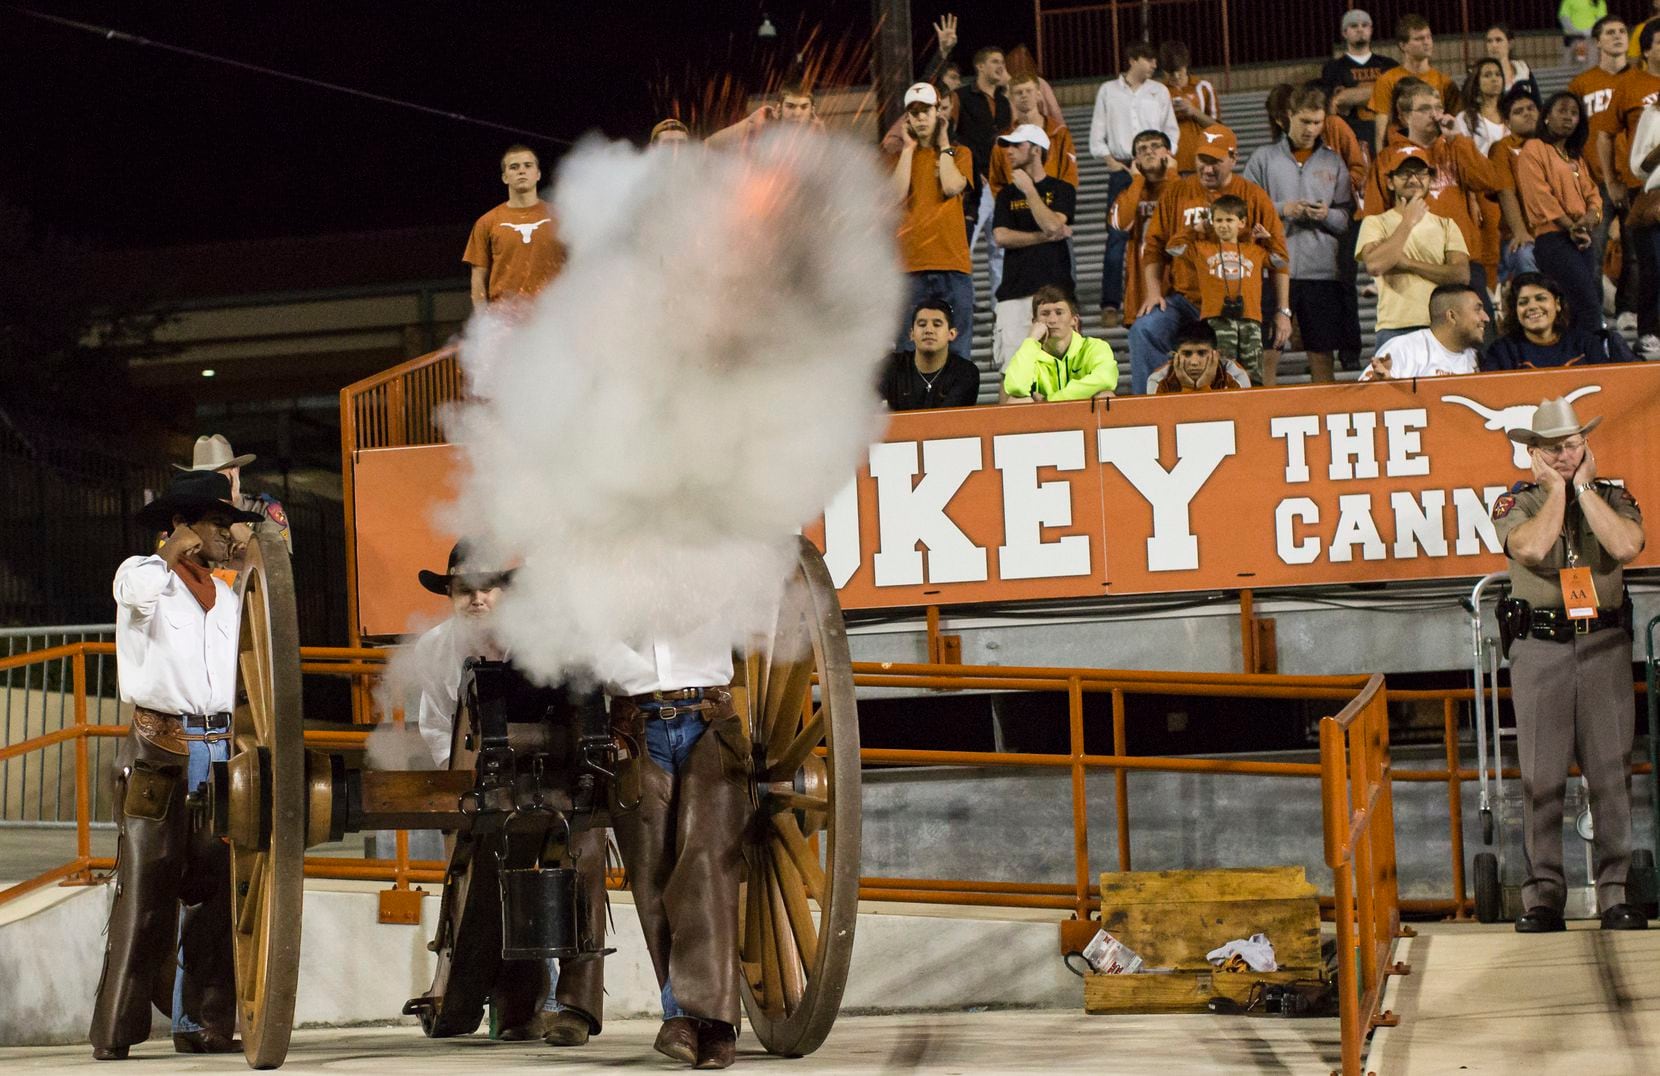 The Texas Cowboys, an elite student organization at the University of Texas, are in charge of firing Smokey the Cannon at home football games. (Cal Sport Media)